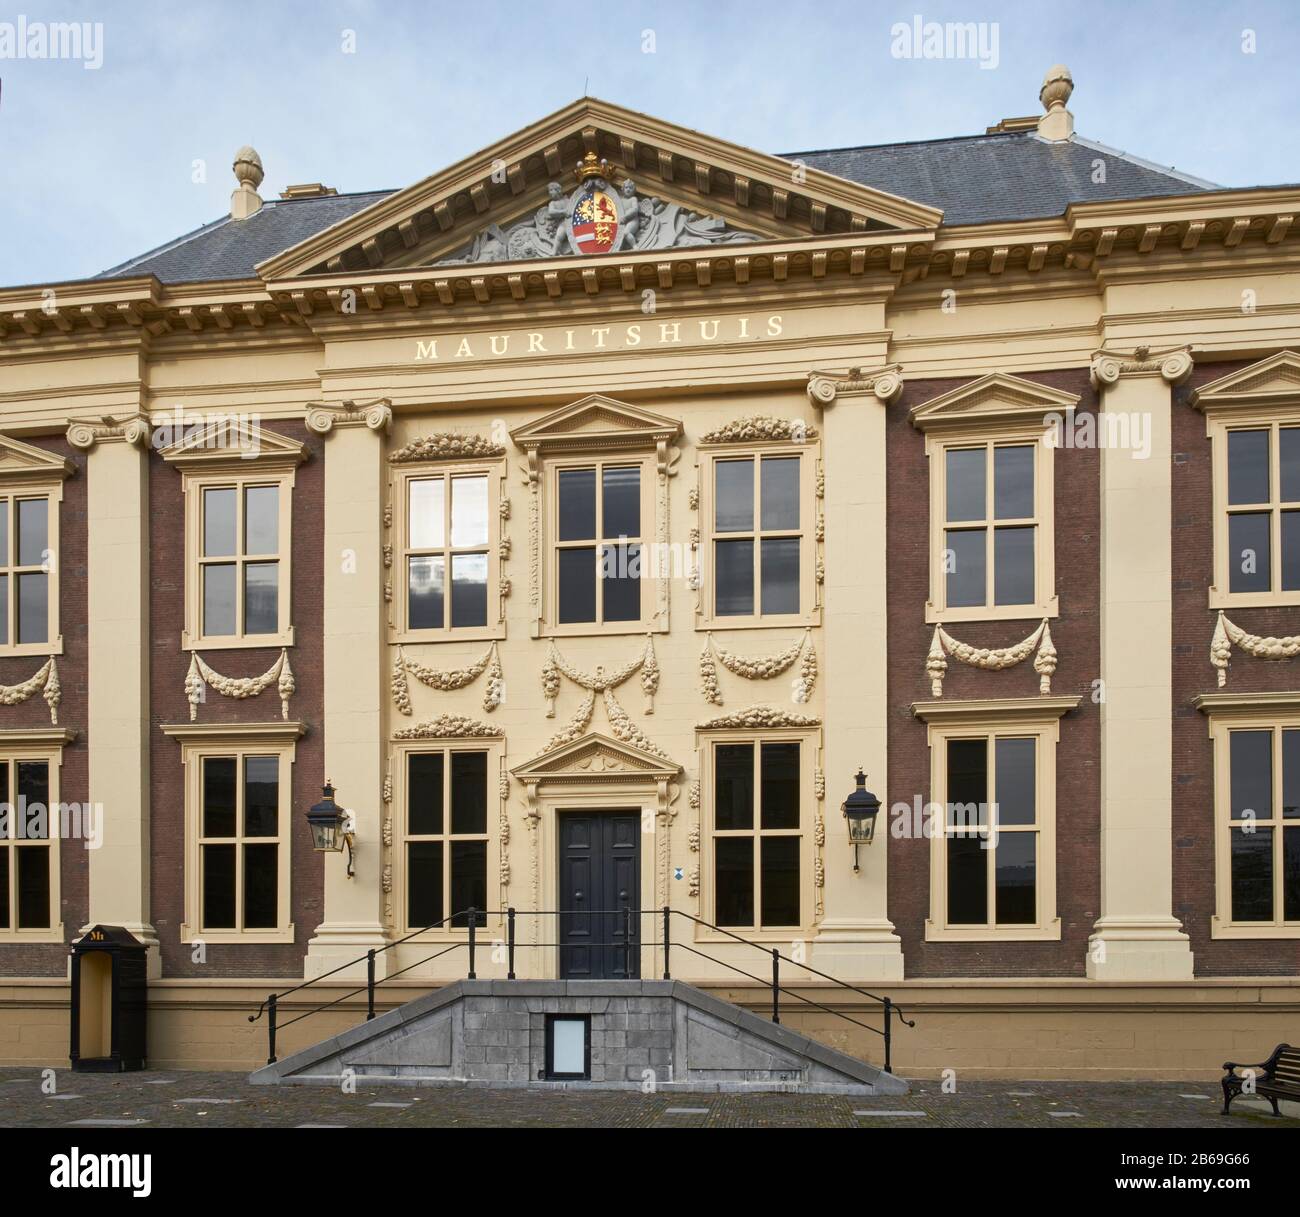 Mauritshuis, The Hague (Den Haag) , Holland. Built between 1636 and 1641 for John Maurice, Prince of Nassau-Siegen. The Dutch Classicist building was Stock Photo